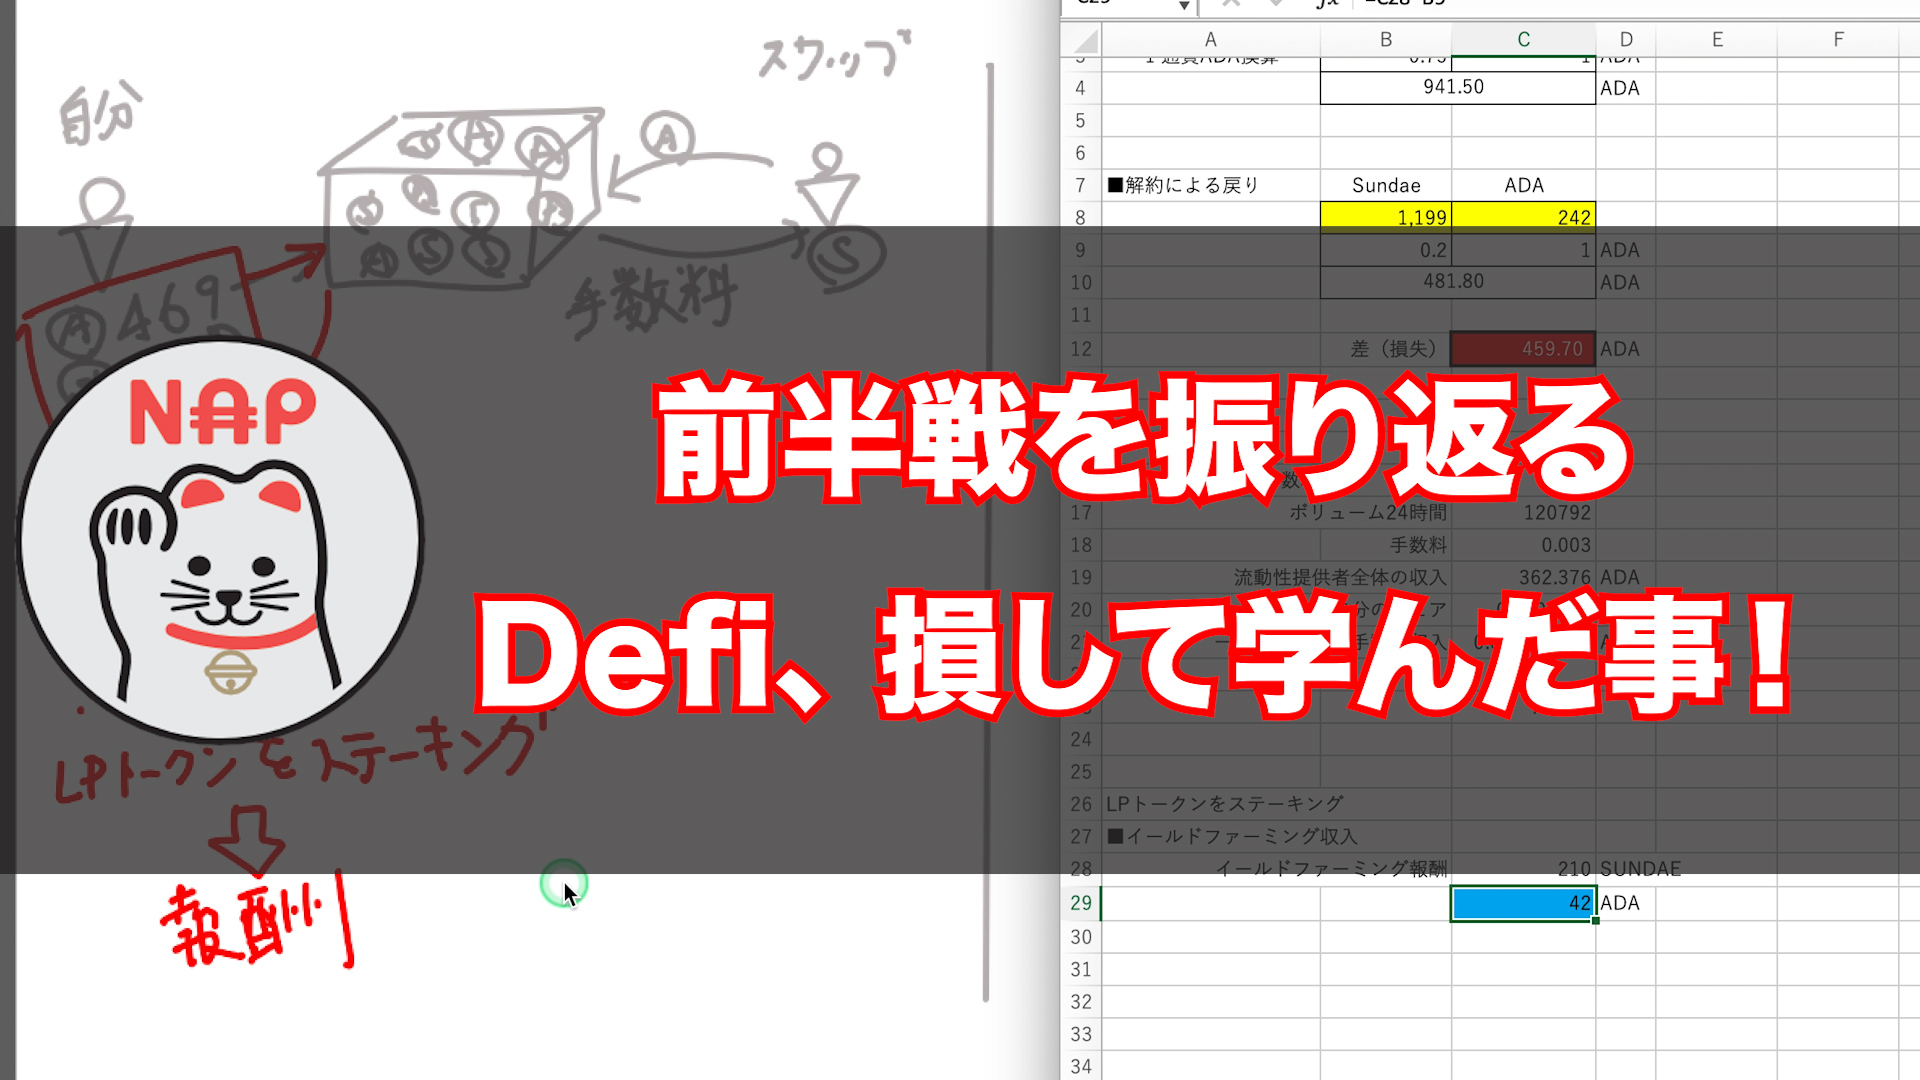 Defiの結果 - サムネイル